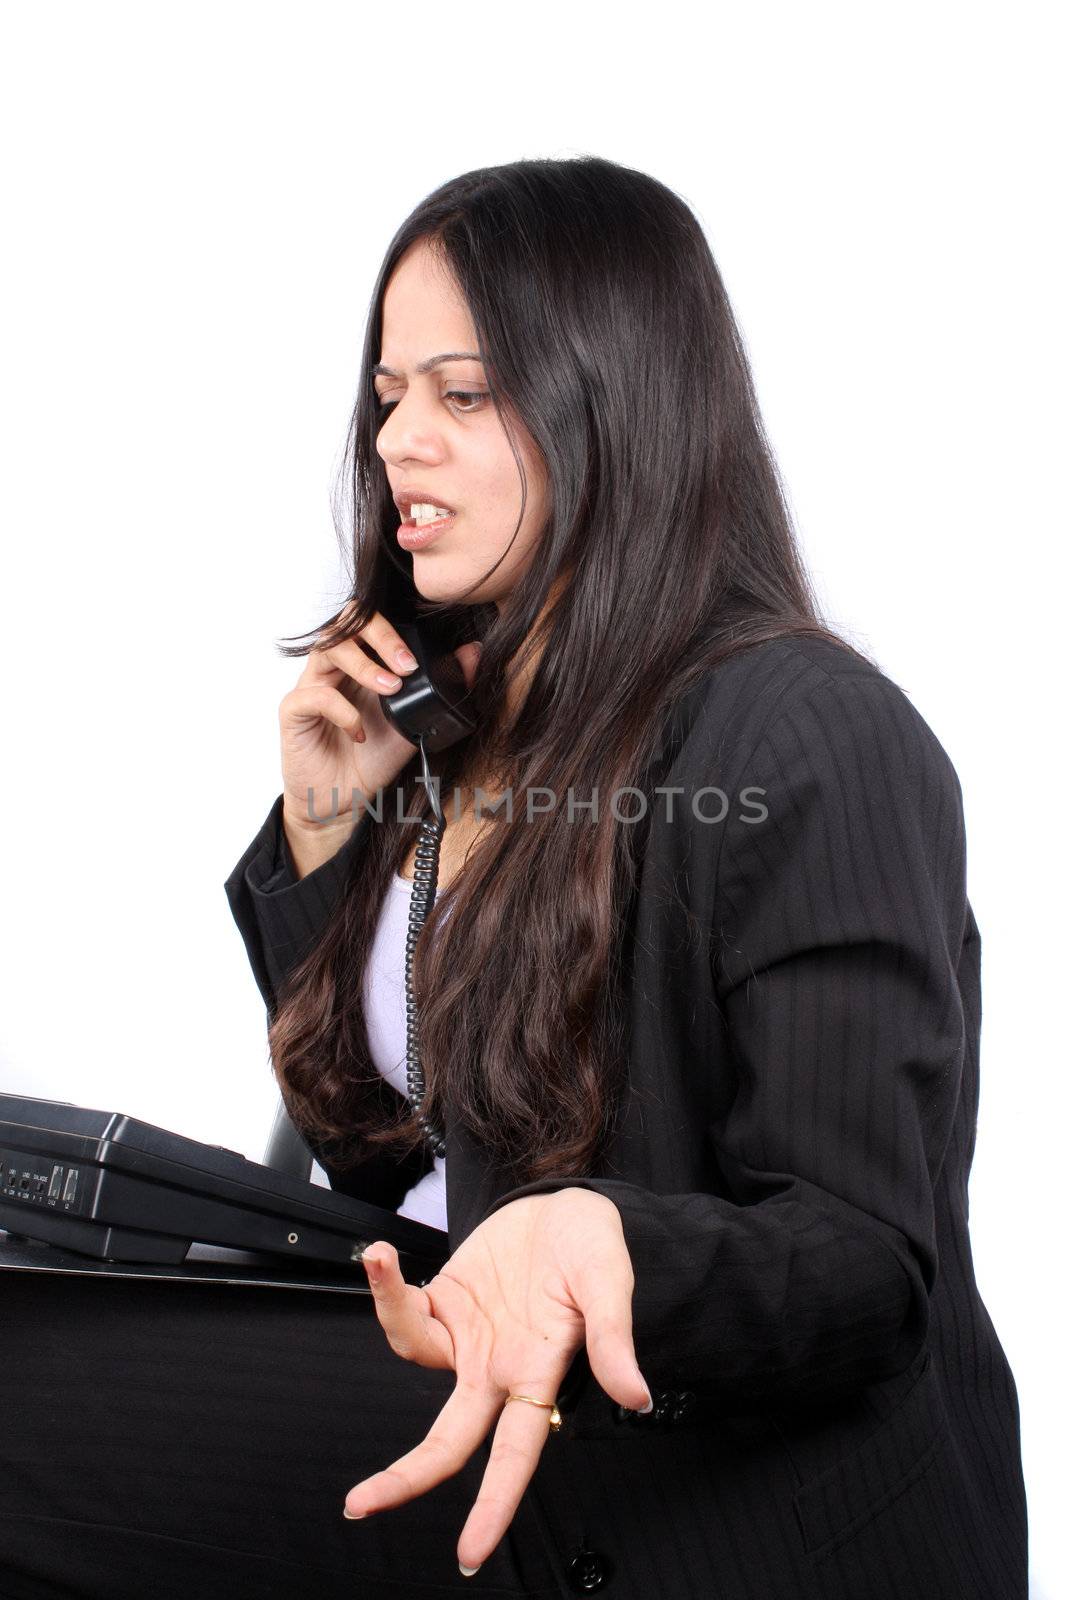 An Indian businesswoman irritated over a telephonic conversation, on white studio background.